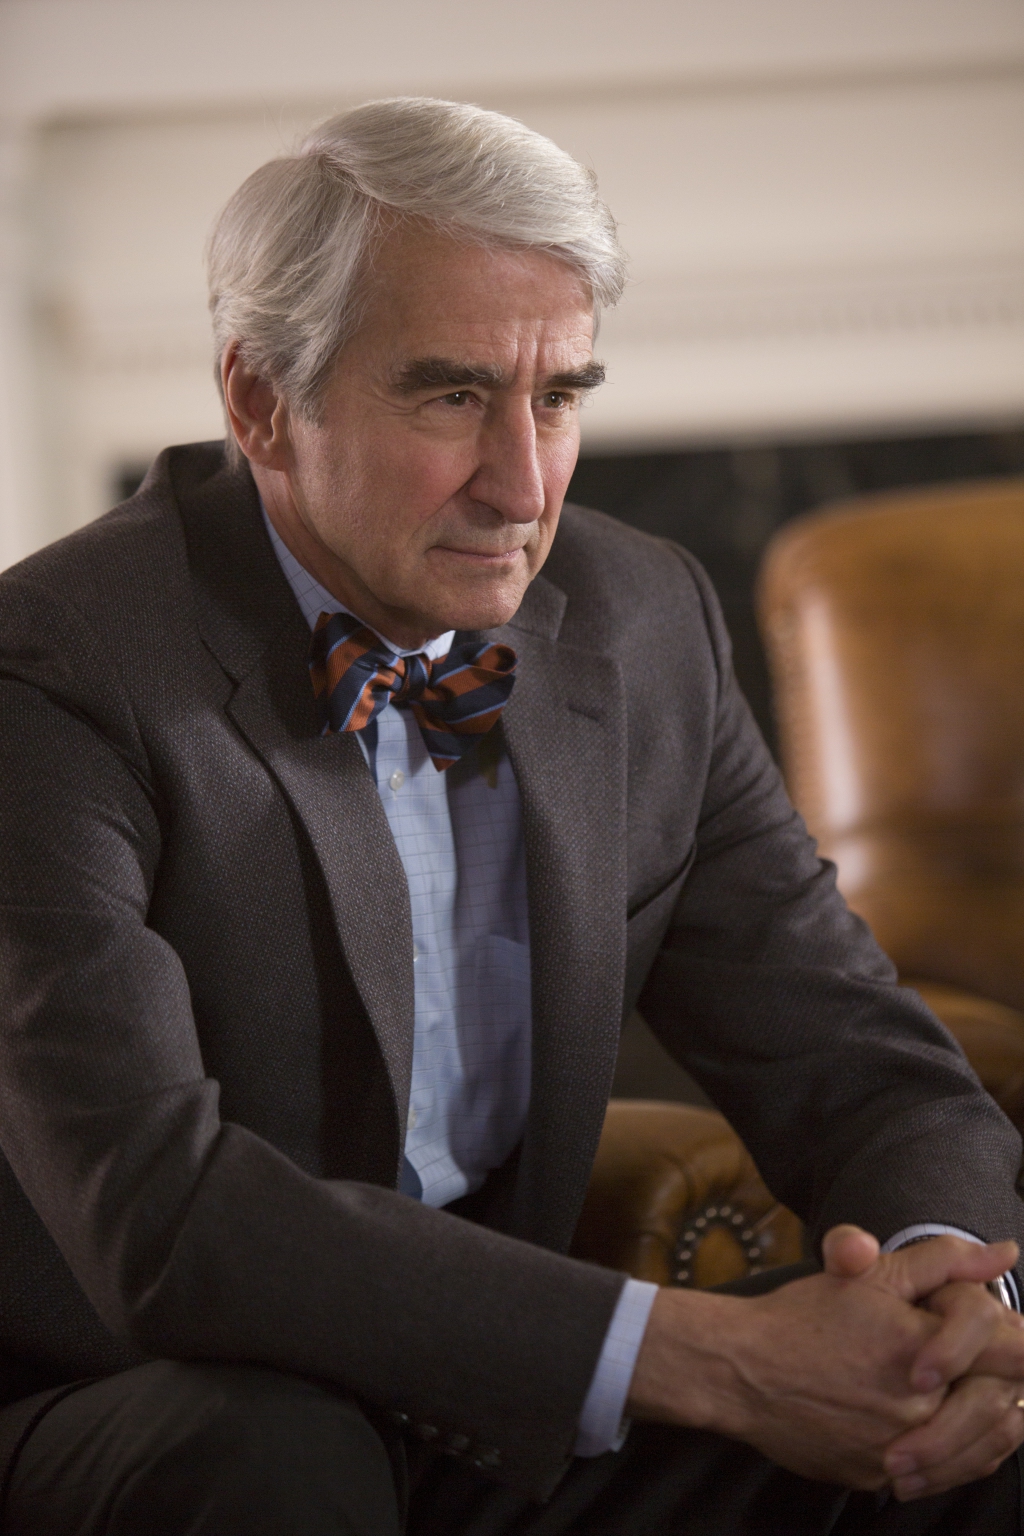 Sam Waterston’s 60year career on stage Beacon